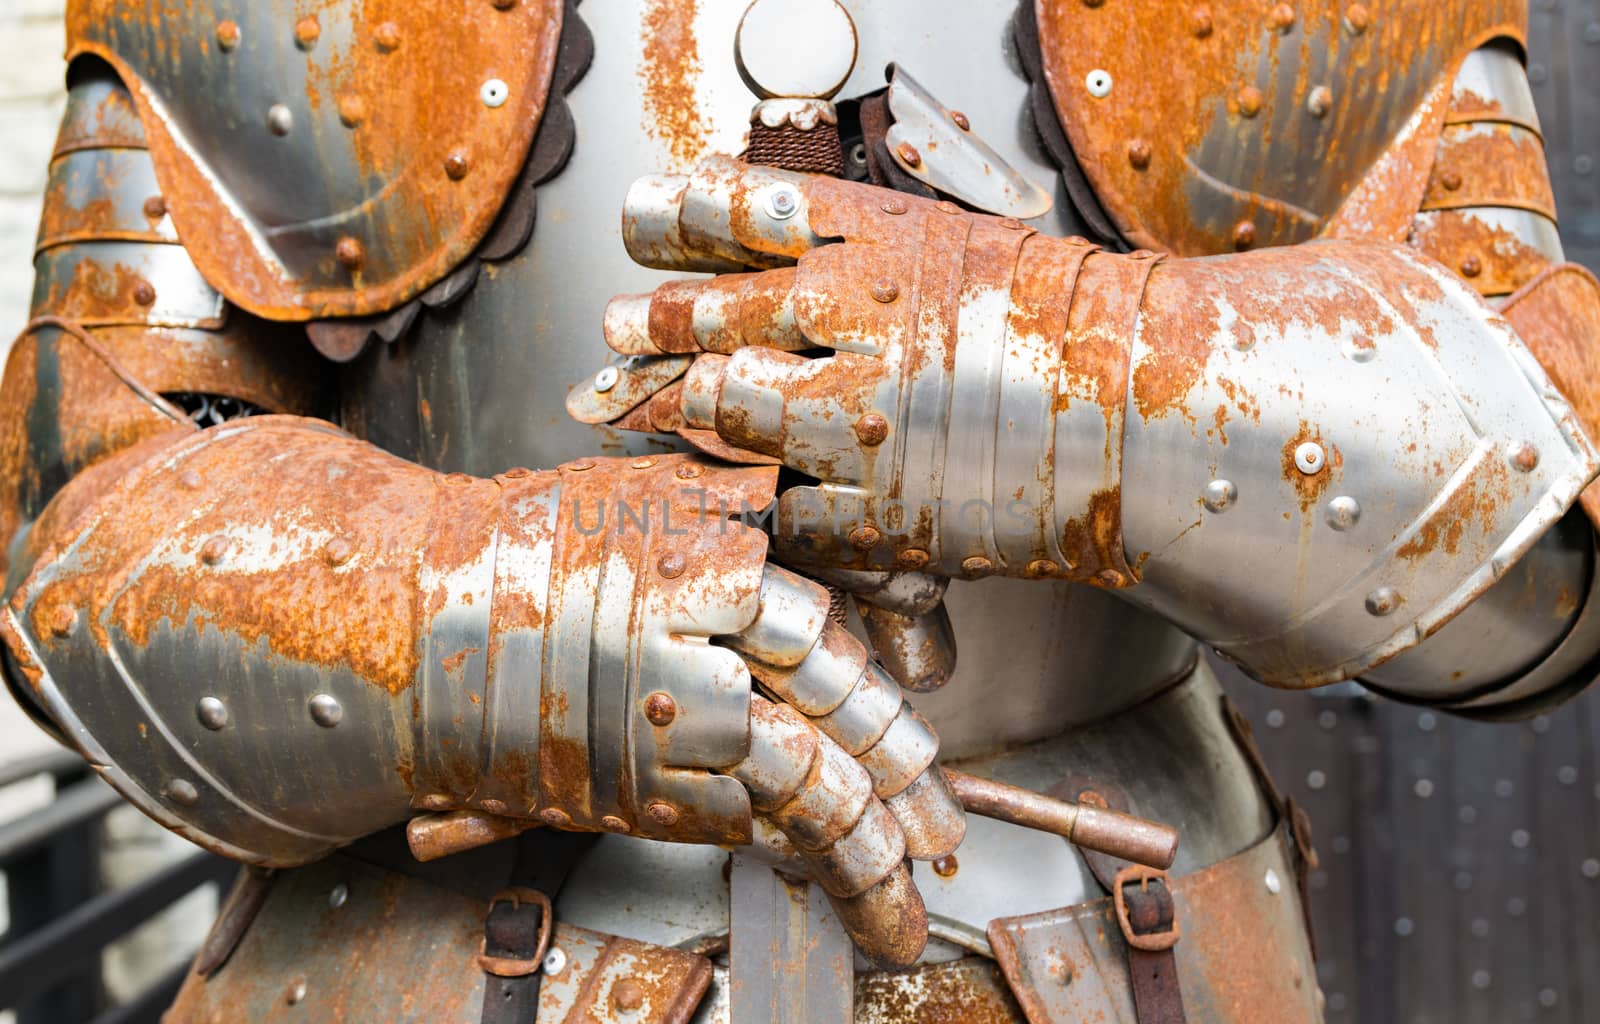 Detail of an old rusty medieval armor.